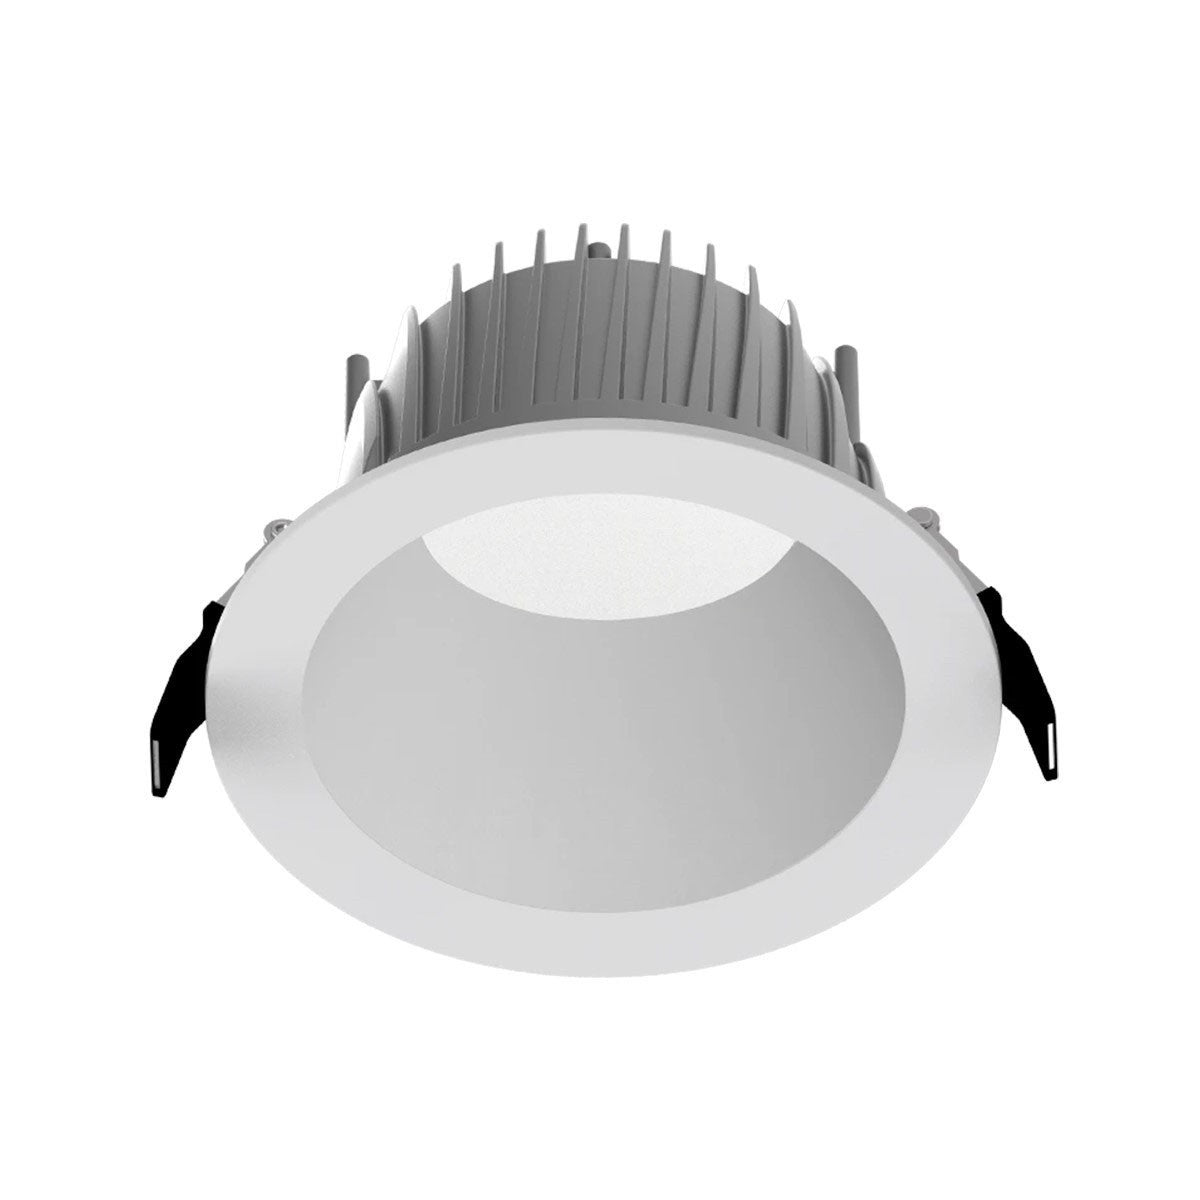 6 Inch LED Deep Regress Commercial Downlight, Field Adjustable 12/18/24W, 800/1200/1600 Lumens, 30/35/40/50K, Smooth Trim, Matte Silver Finish